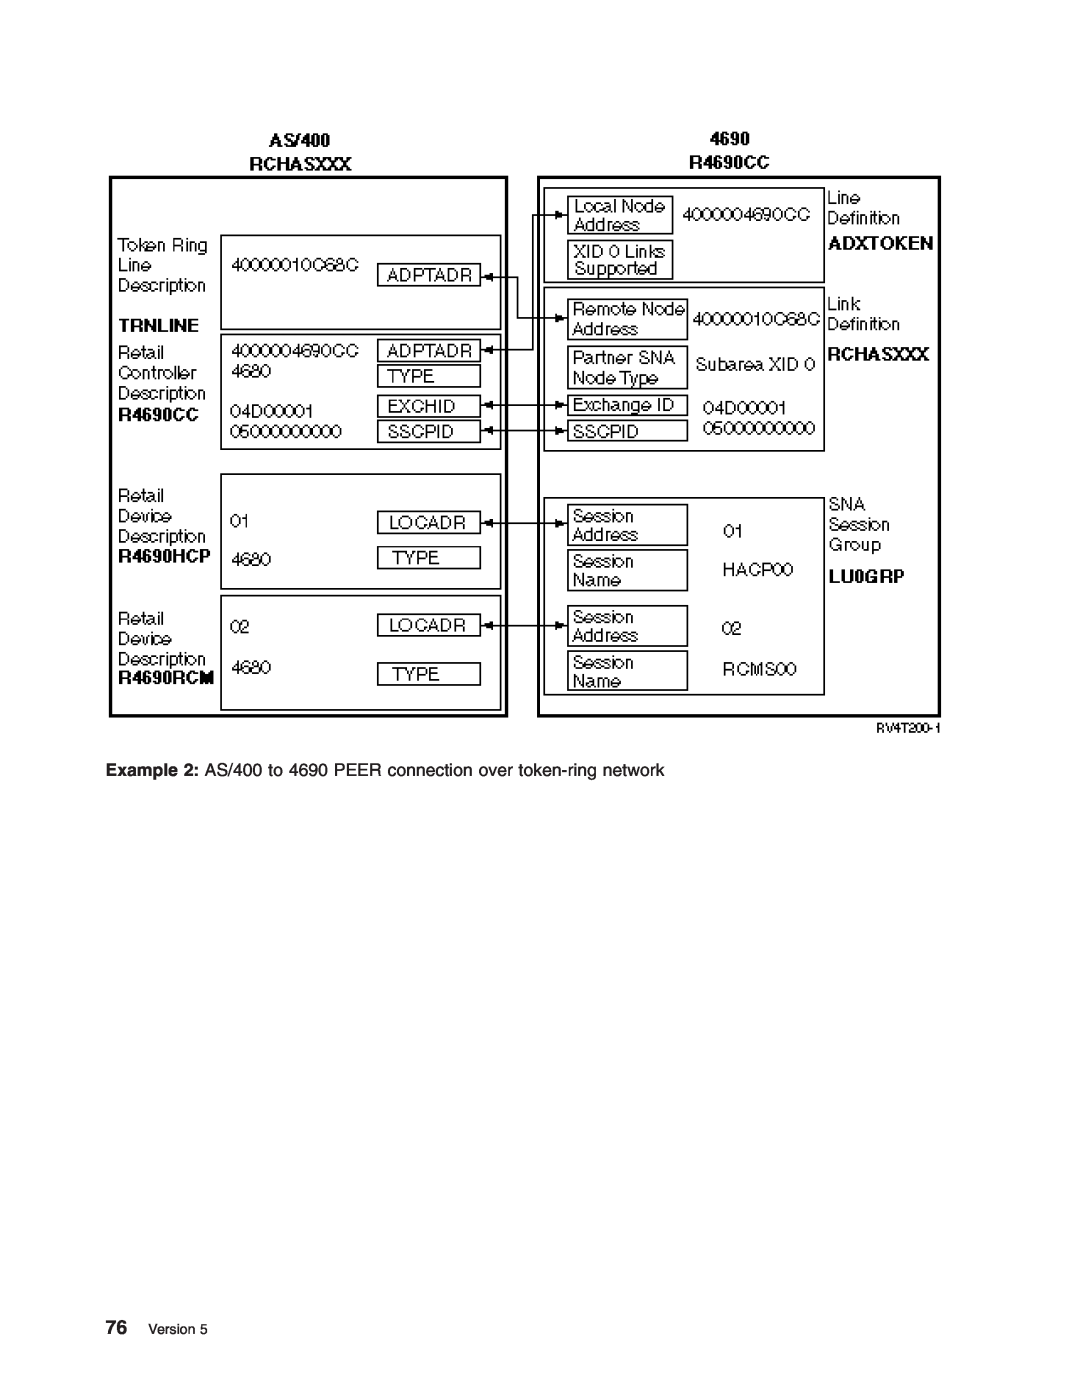 IBM manual Example 2 AS/400 to 4690 PEER connection over token-ring network, Version 